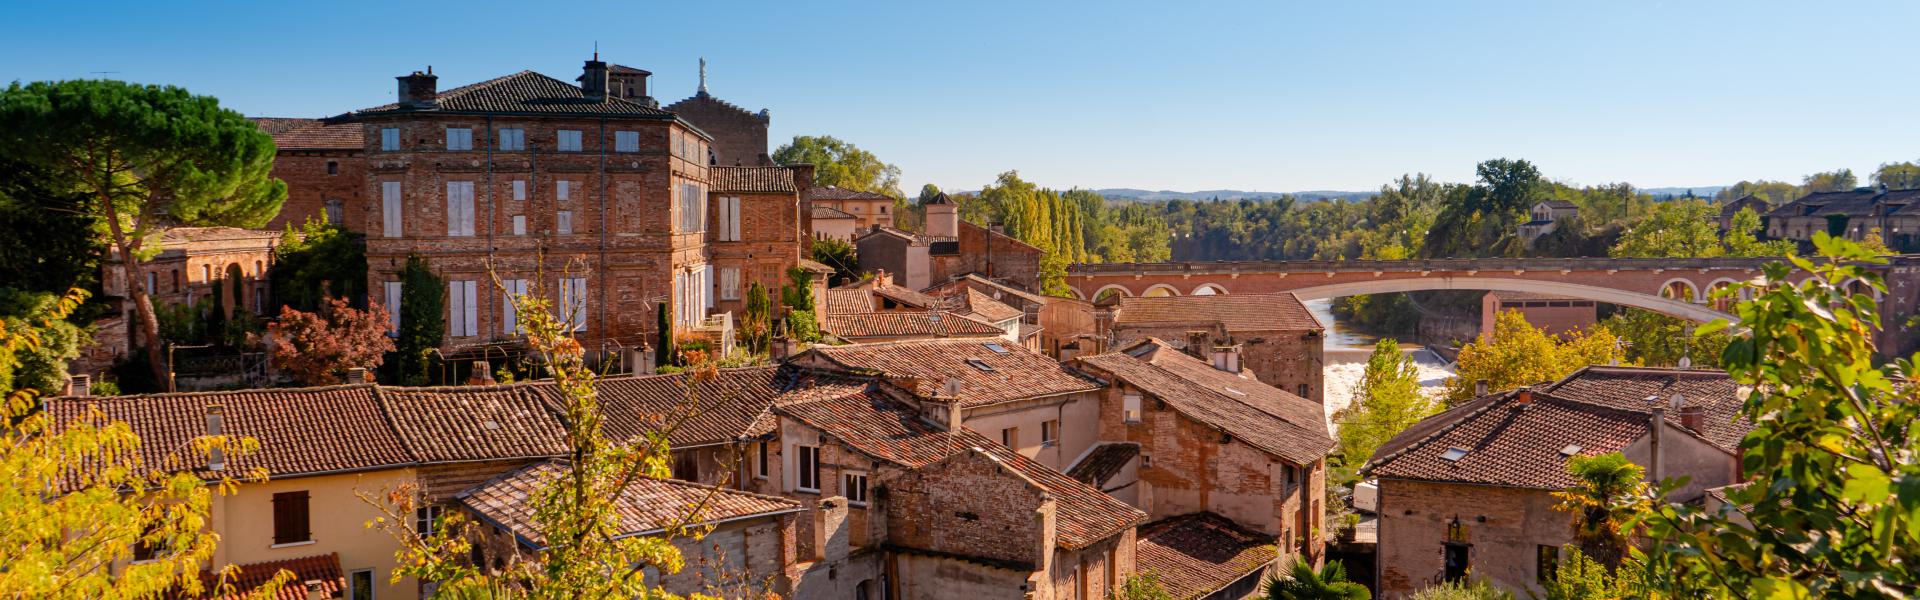 Gaillac in southern France and the river Tarn. Midi-Pyrénées region